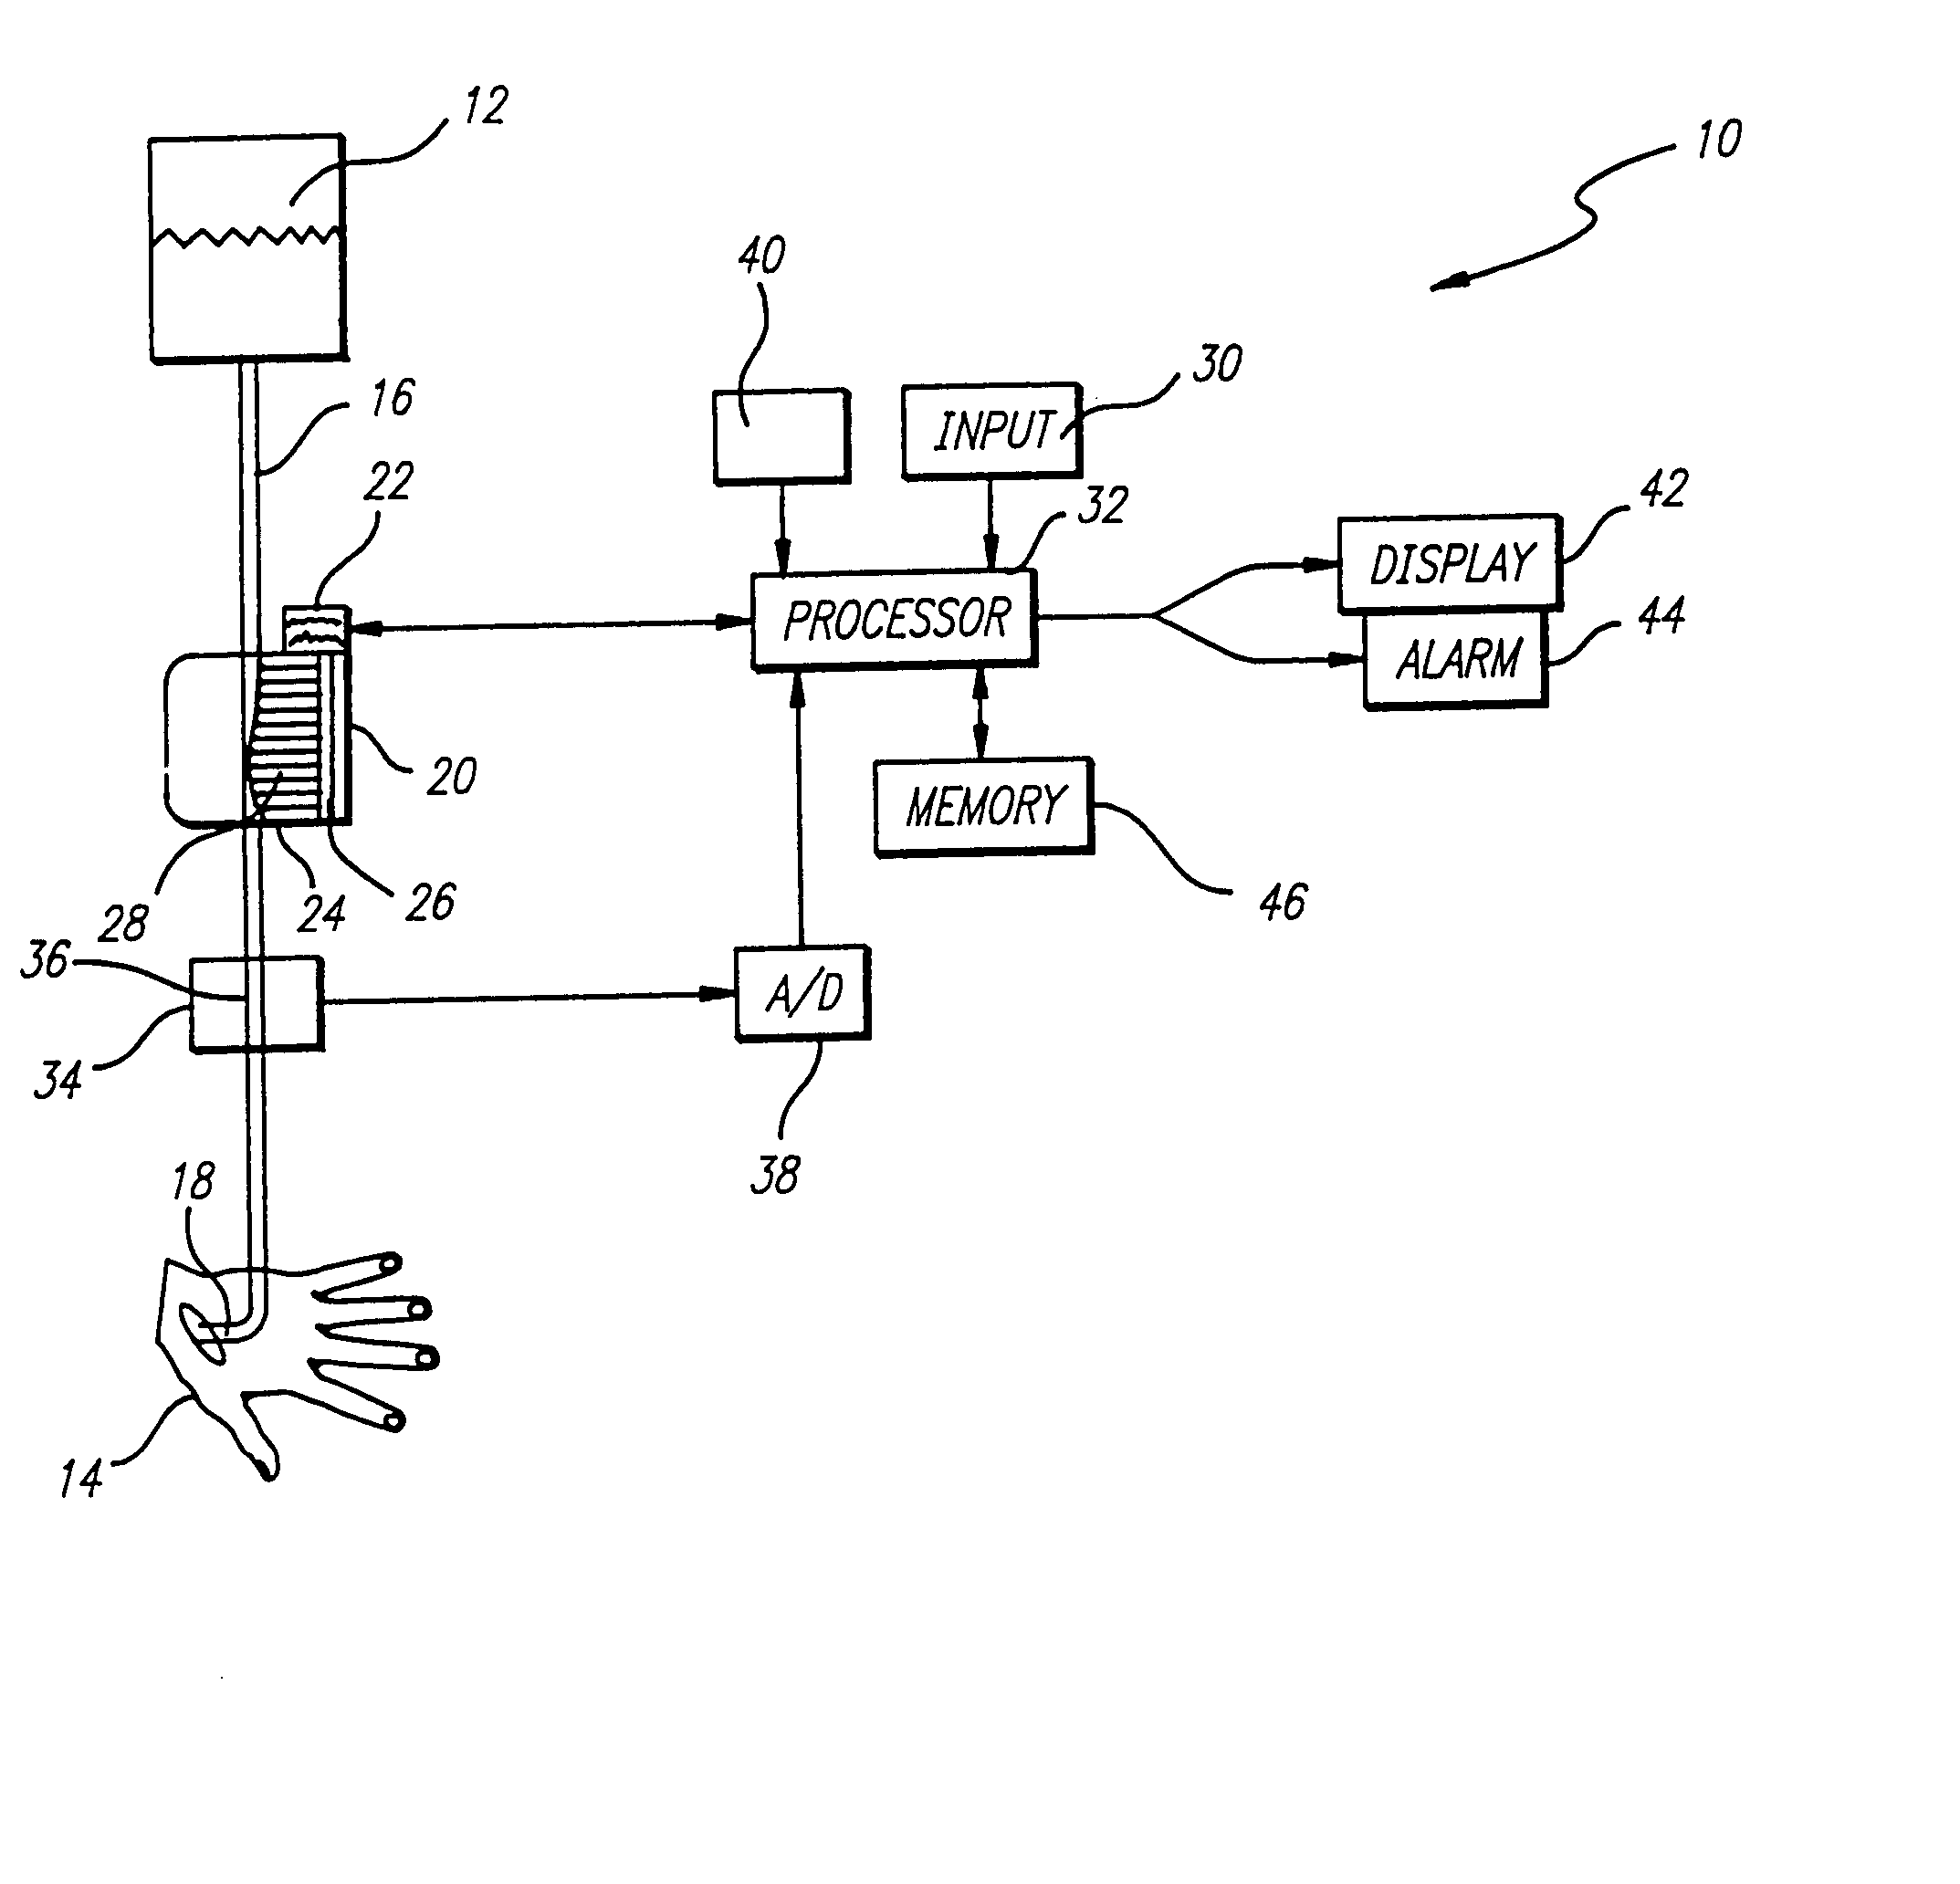 Apparatus and method for air-in-line detection